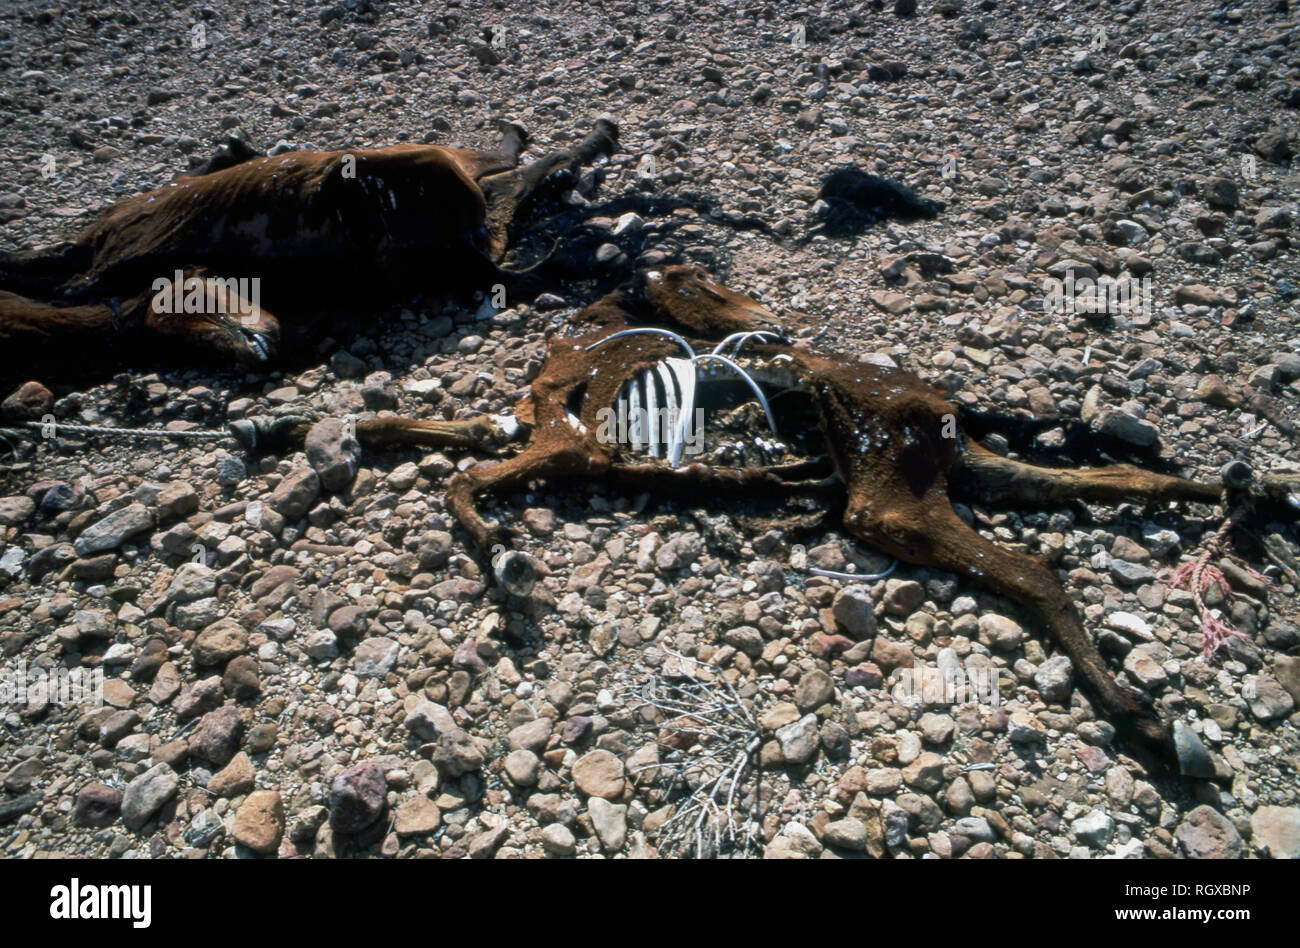 Dead brumbies (wild horse) owing to severe drought conditions, Simpson Desert, Australia Stock Photo